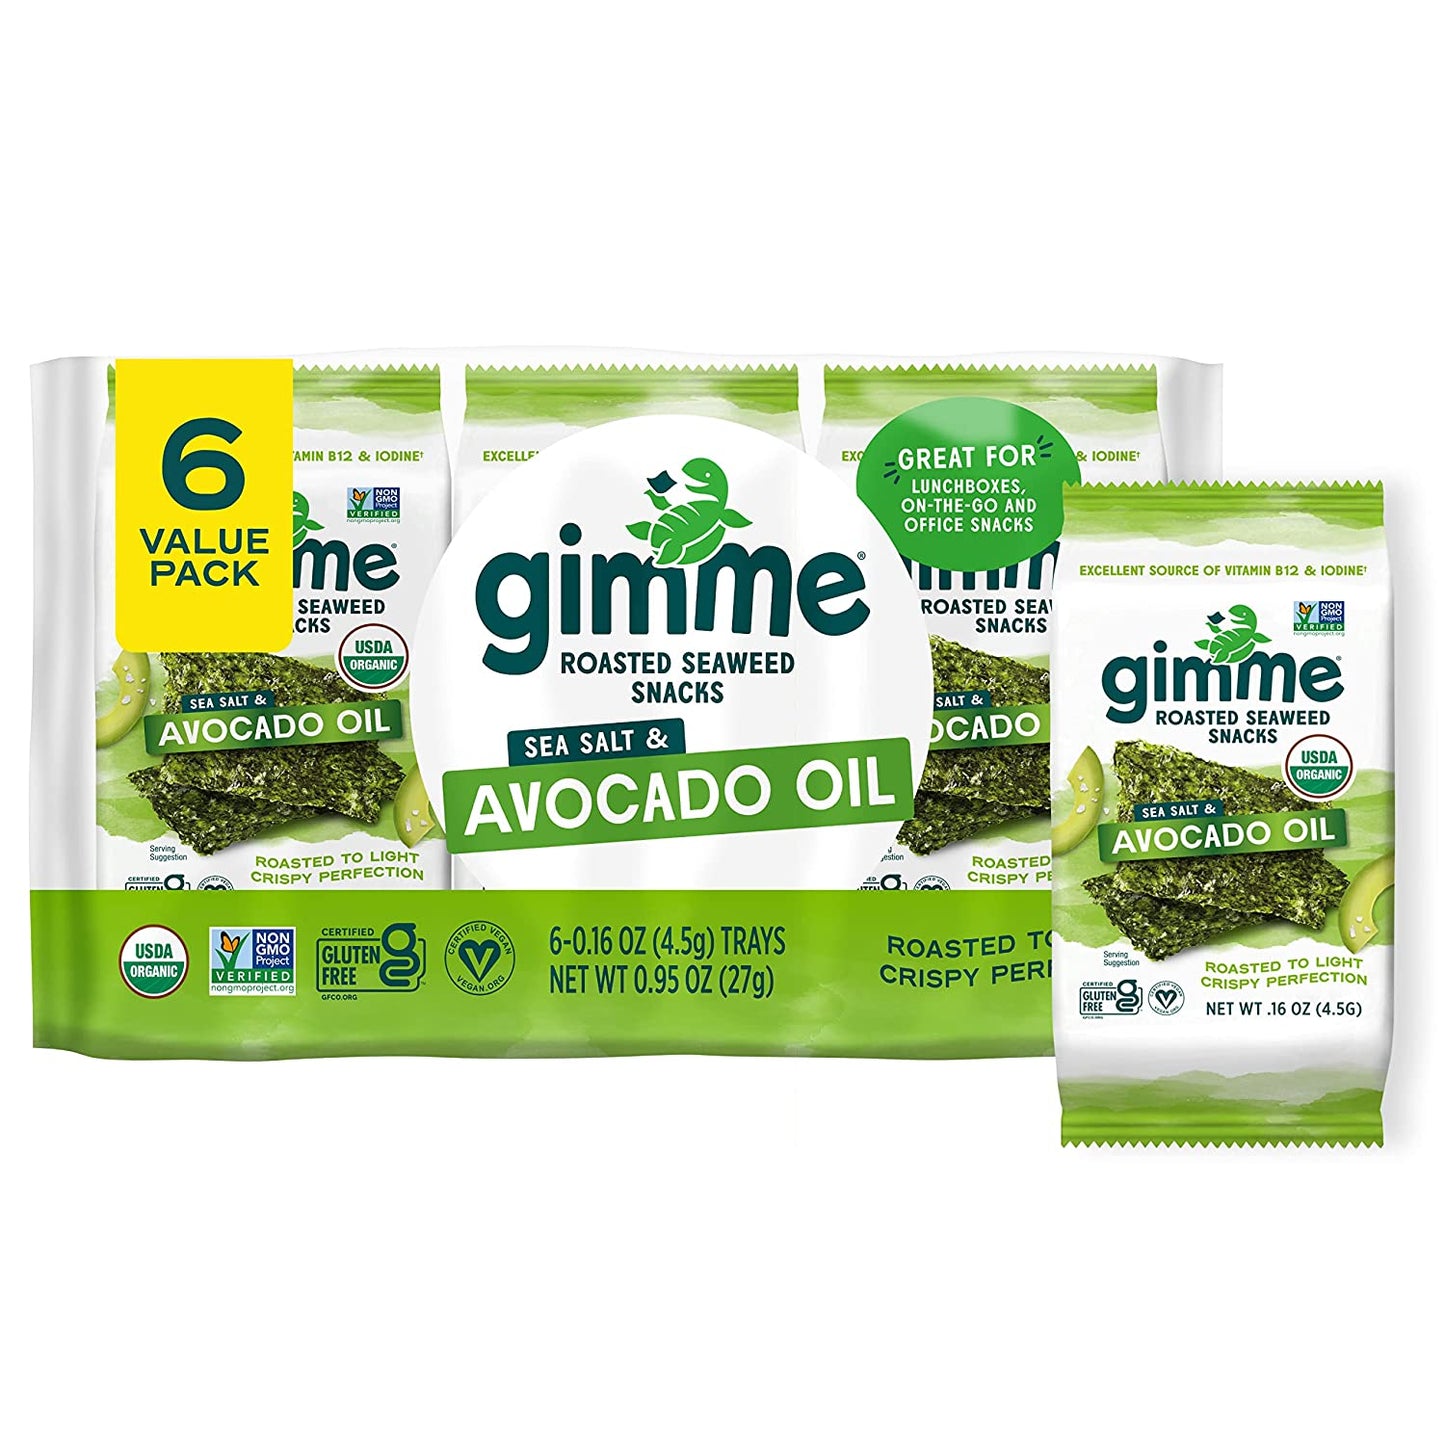 gimMe - Sea Salt & Avocado Oil - 6 Count - Organic Roasted Seaweed Sheets - Keto, Vegan, Gluten Free - Great Source of Iodine & Omega 3’s - Healthy On-The-Go Snack for Kids & Adults